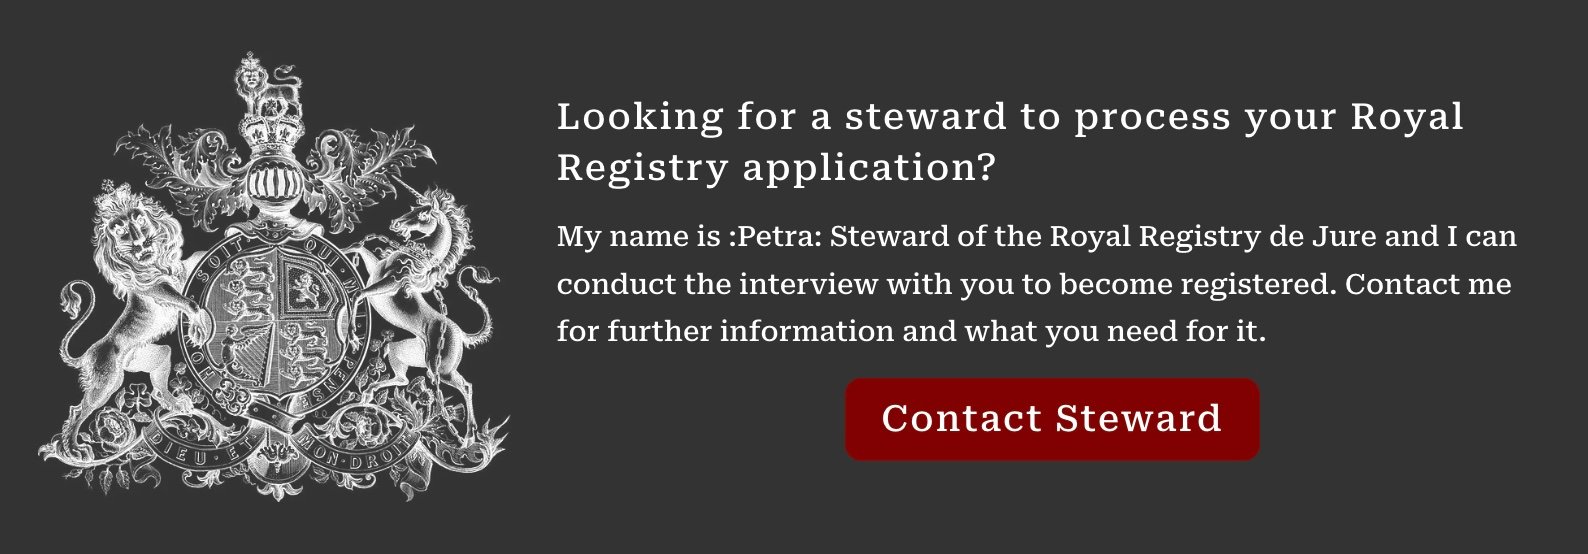 Looking for a steward to process your Royal Registry application?